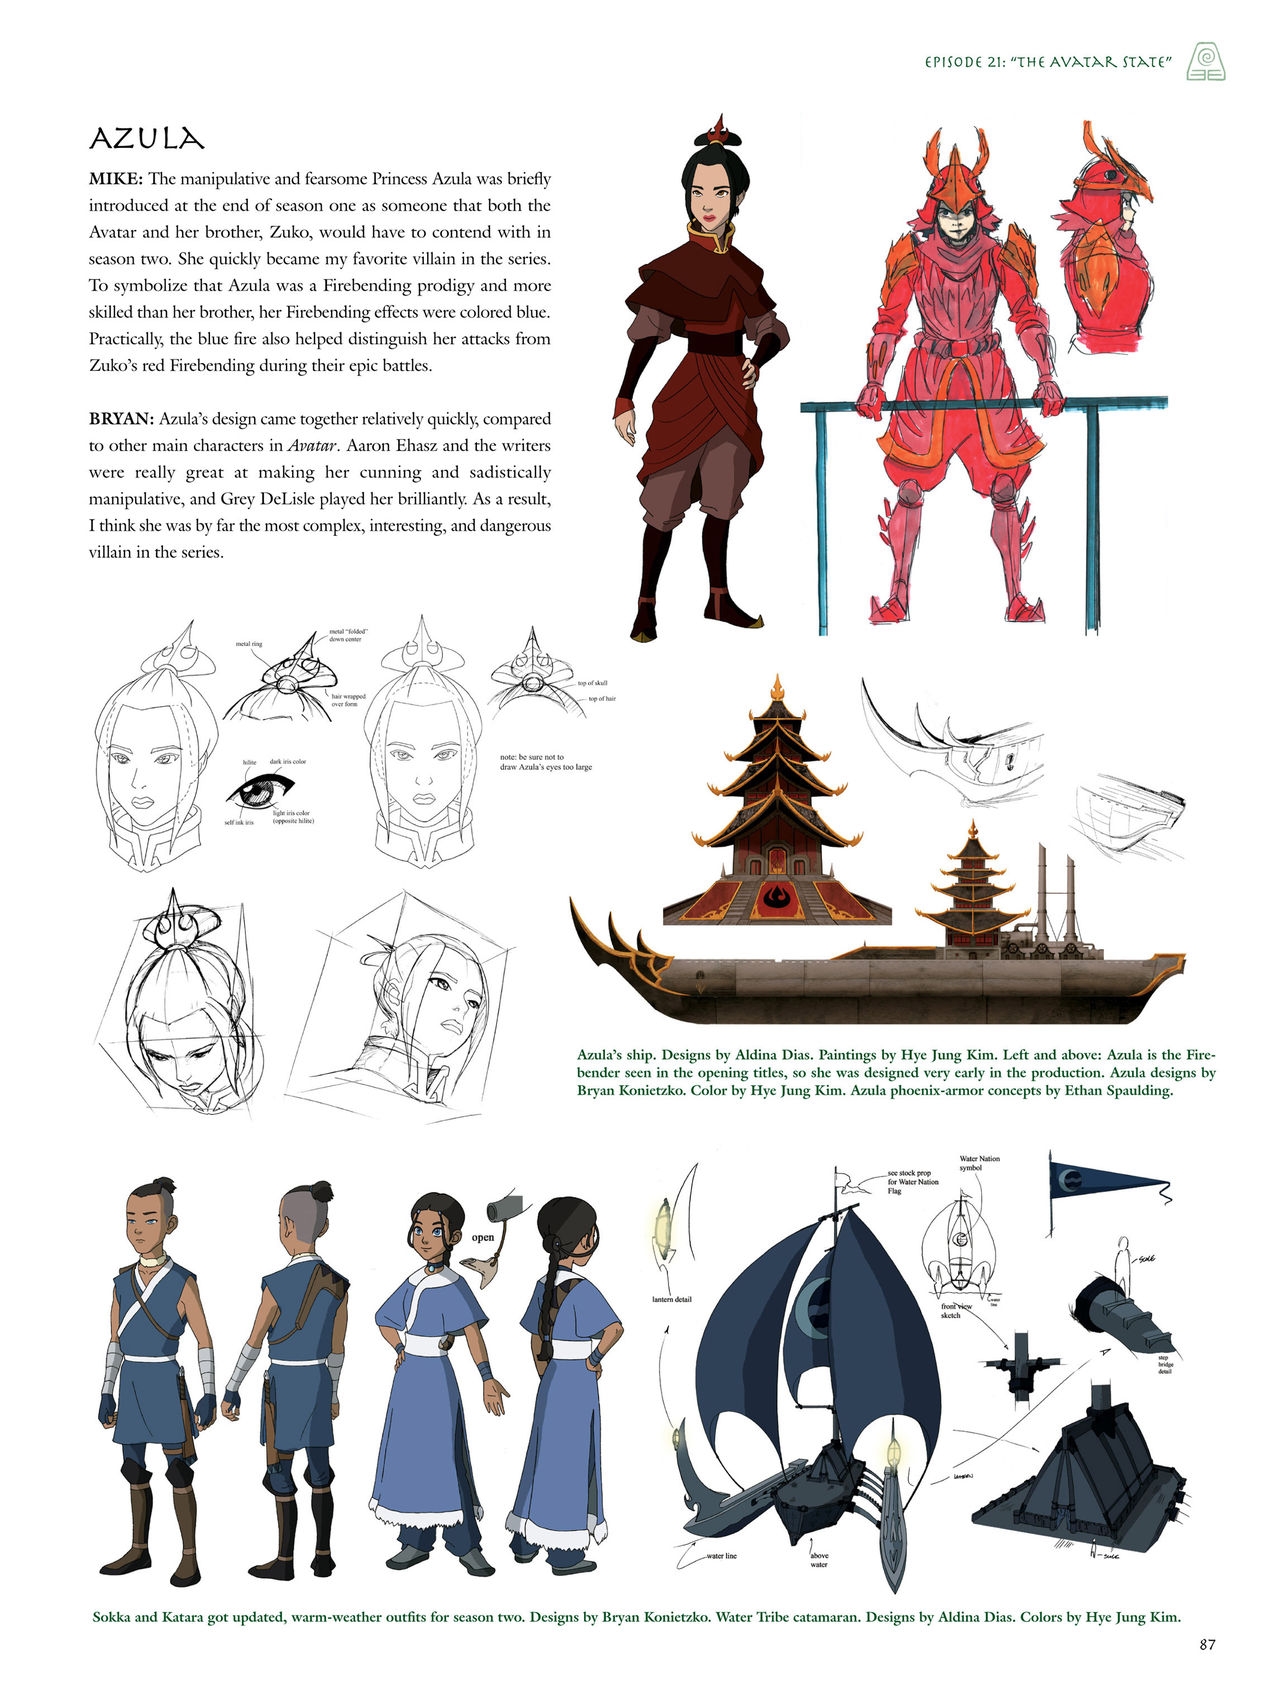 Avatar - The Last Airbender - The Art of the Animated Series 85